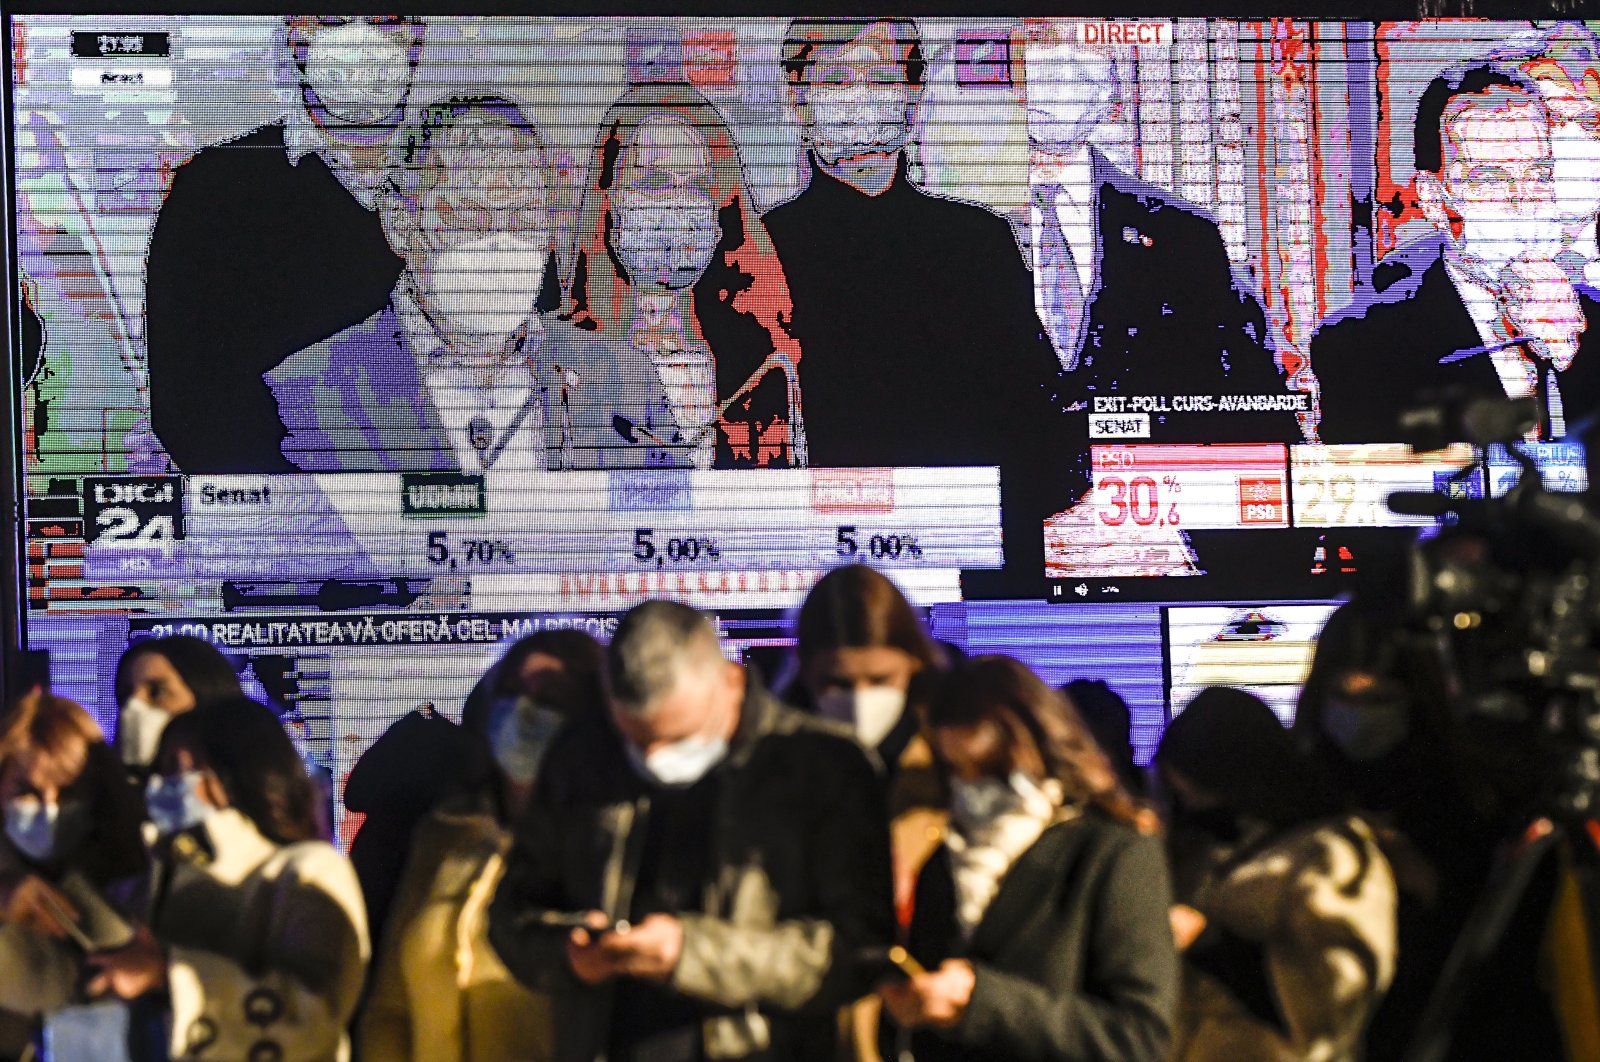 Journalists look at their mobile phones backdropped by large screens showing exit polls in parliamentary elections at the headquarters of the ruling National Liberal Party, in Bucharest, Romania, Dec. 6, 2020. (AP Photo)